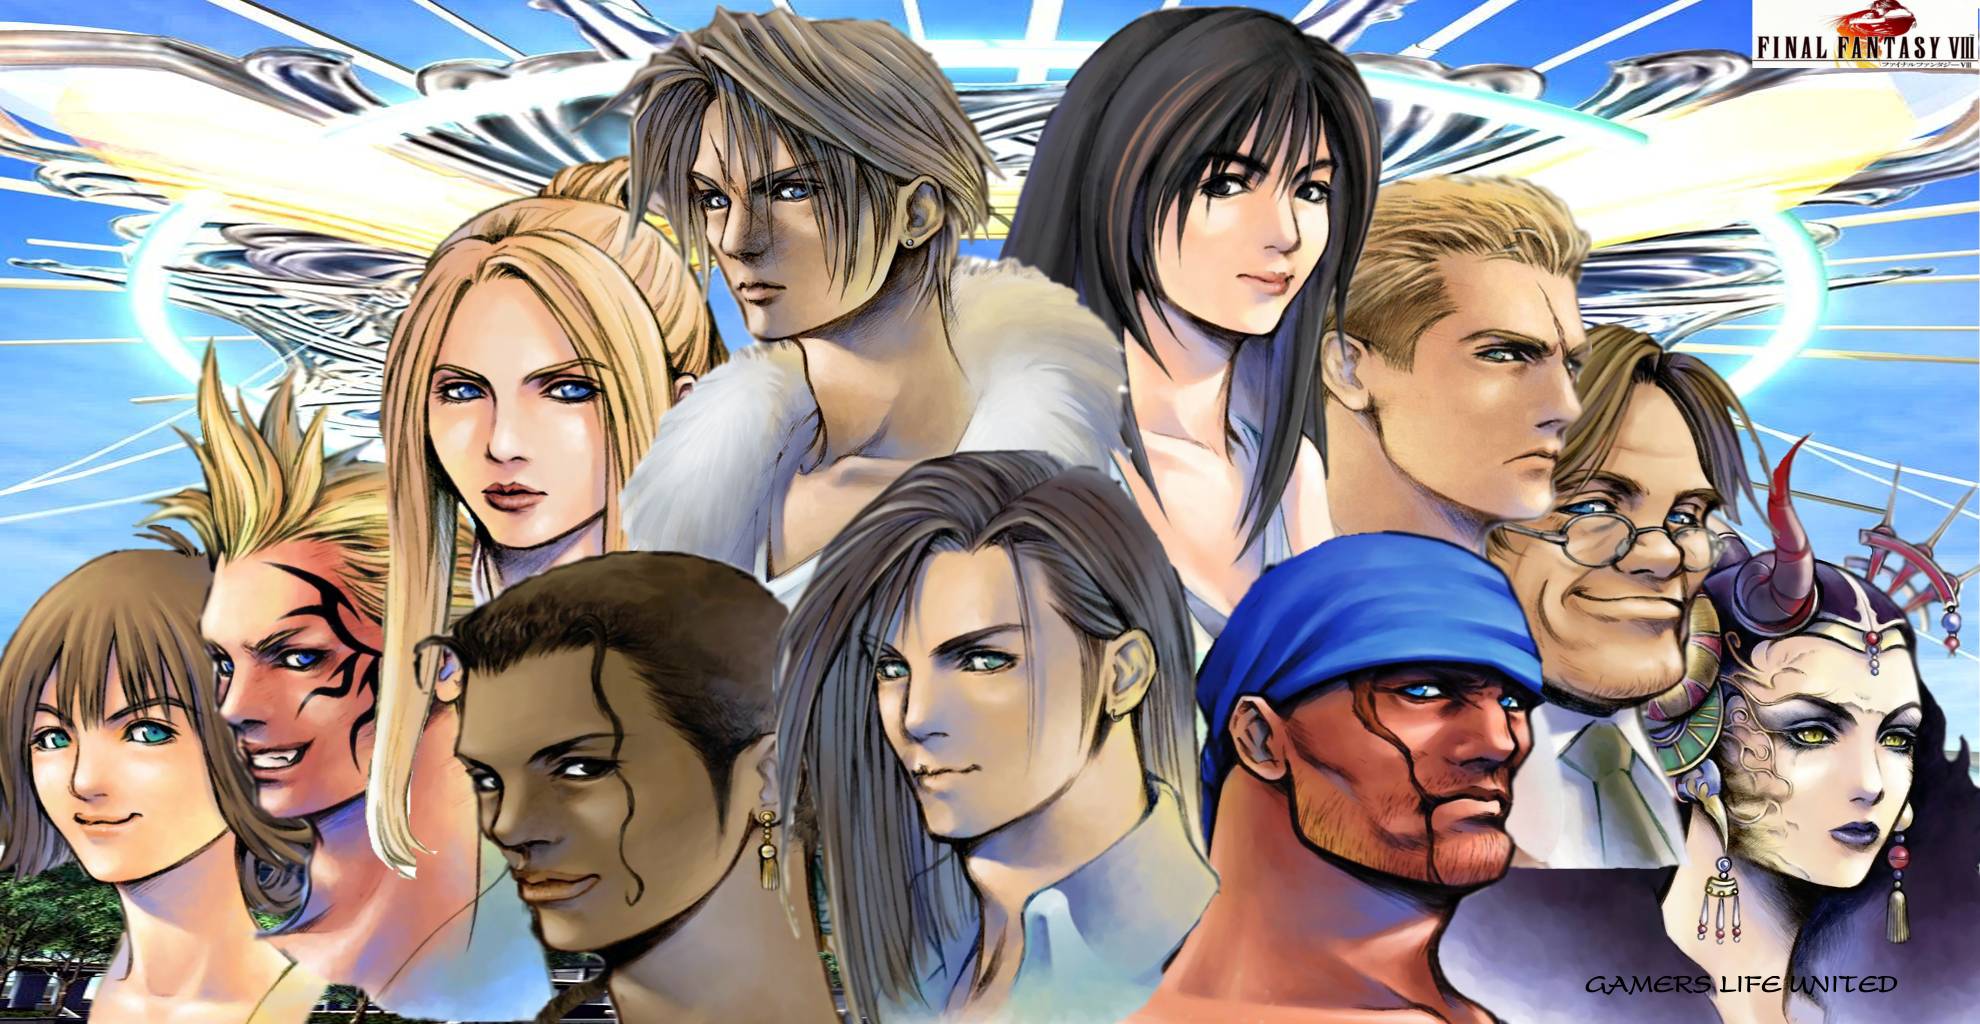 Wallpapers For Final Fantasy 8 Wallpapers Hd.